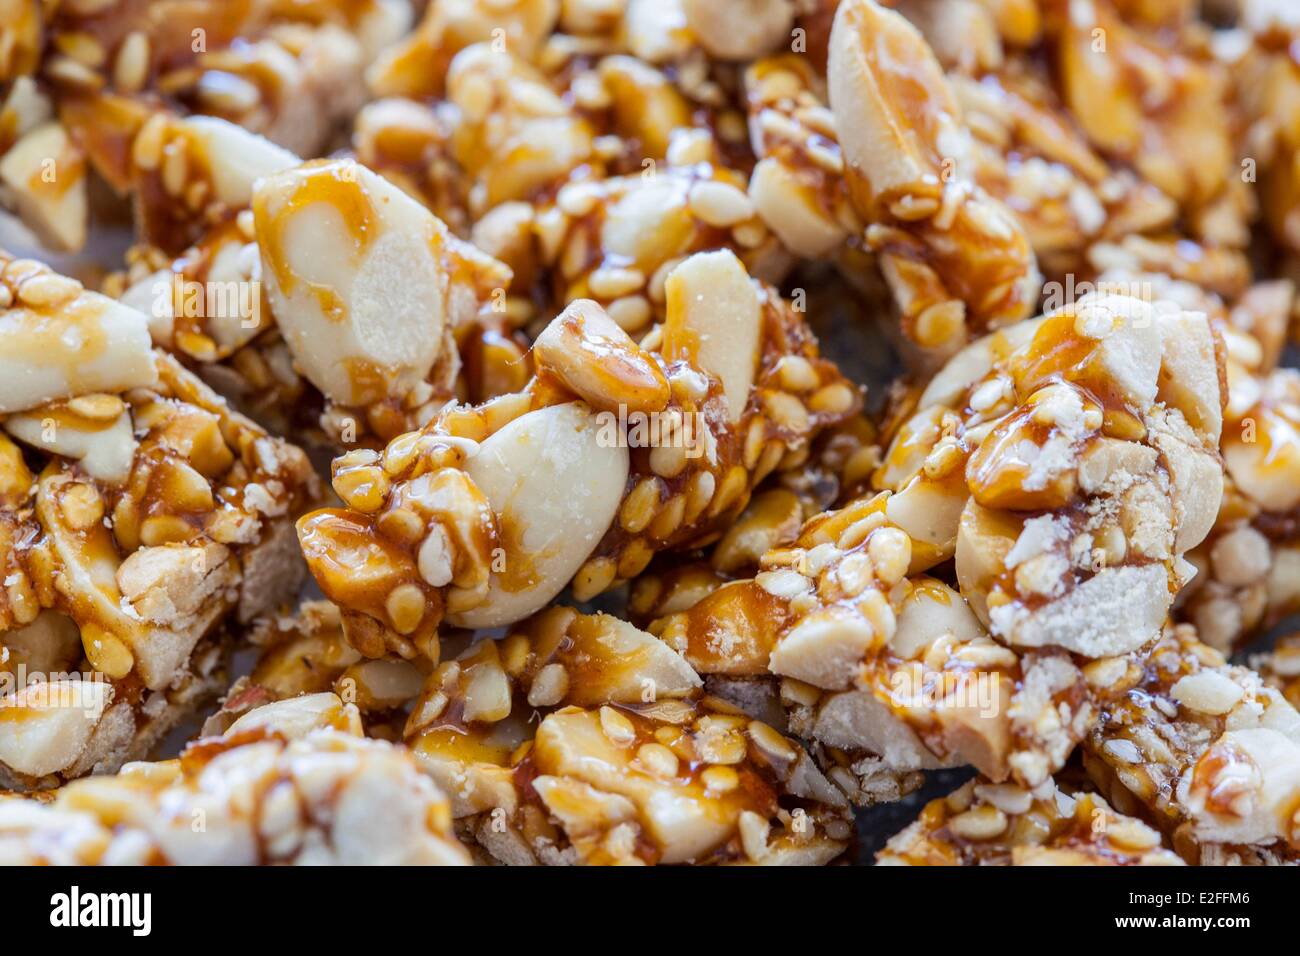 Cyprus, Yeroskipos, pastellaki, confectionery with sesame, peanuts and honey syrup Stock Photo